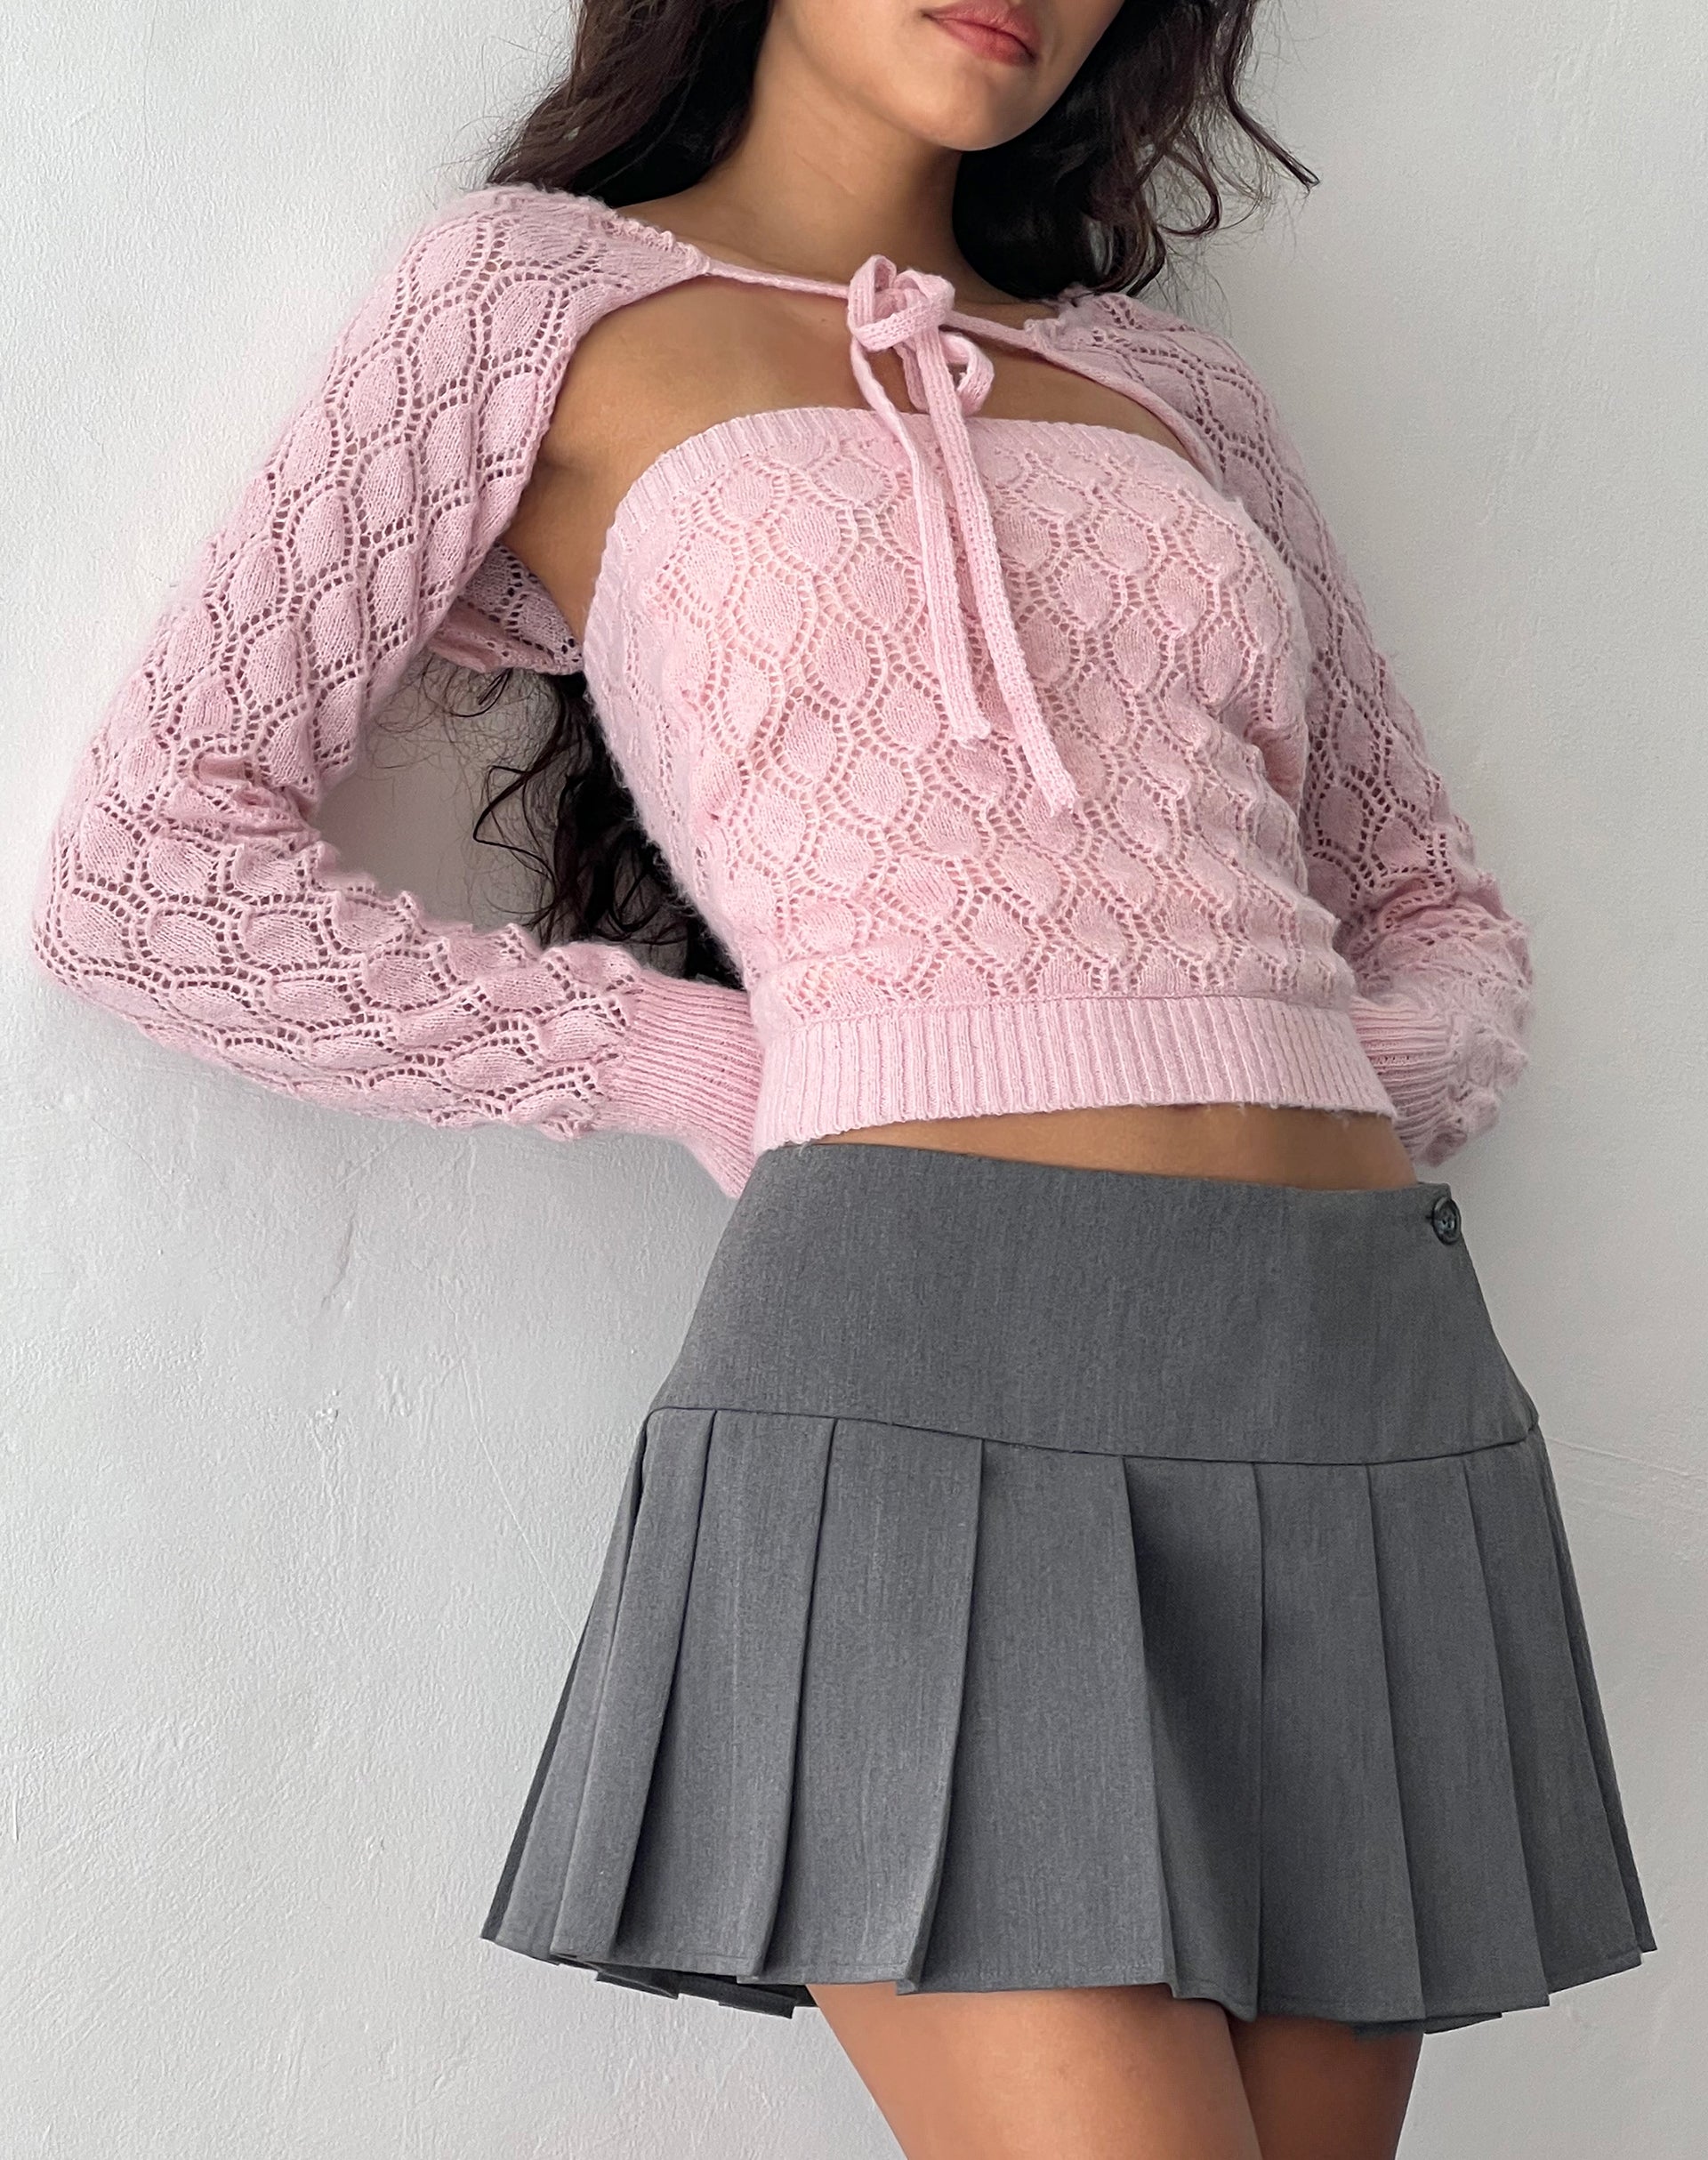 Arinah Knitted Shrug Top in Ballet Pink